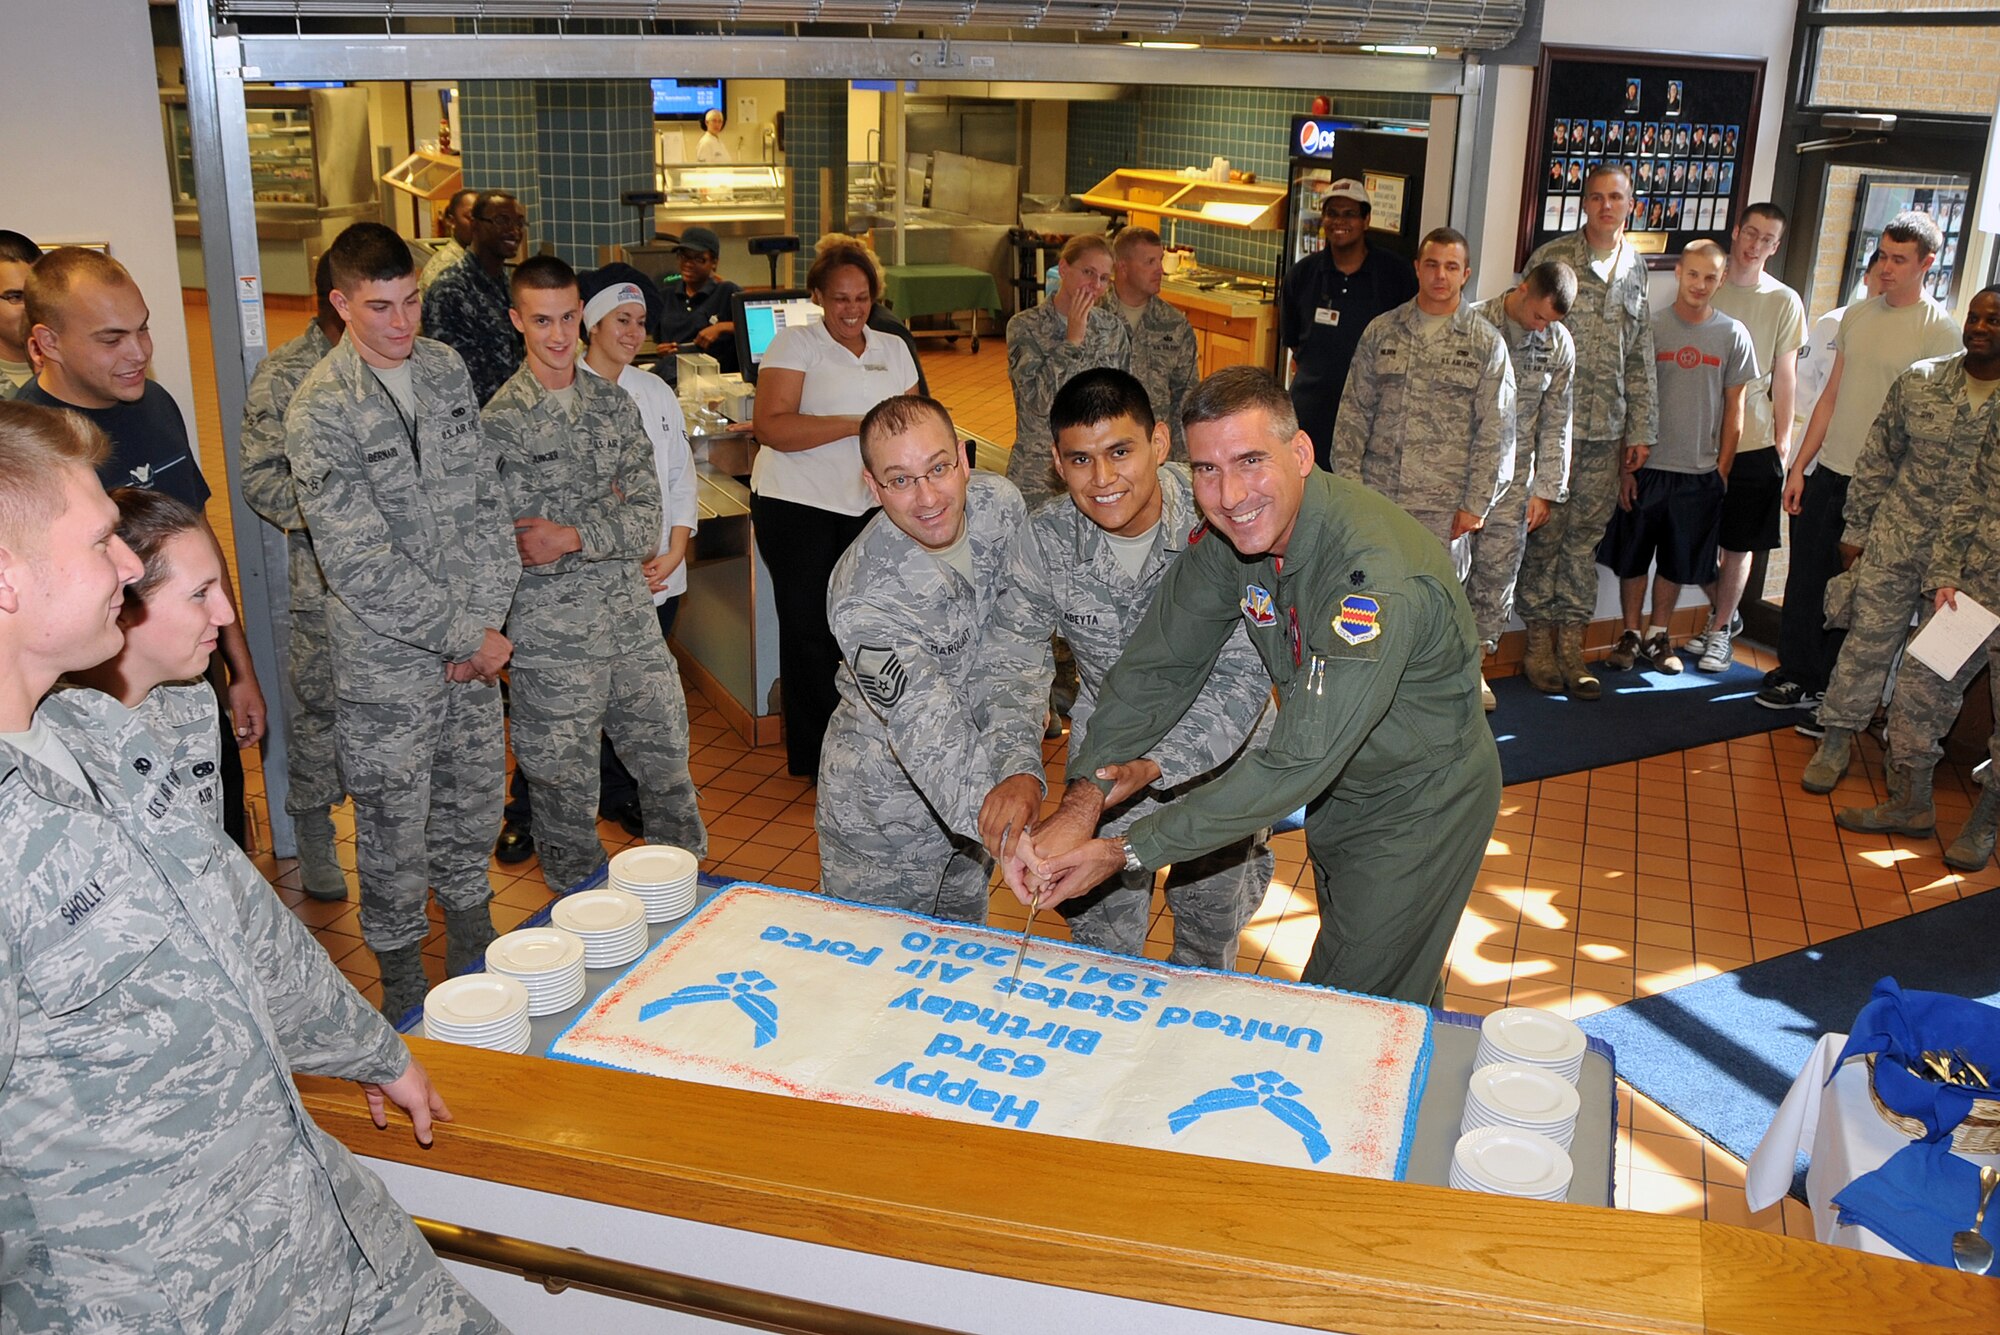 OFFUTT AIR FORCE BASE, Neb. - Master Sgt. Randy Marquart, non-commissioned officer in charge of the King Dining Facility, Airman Chad Abeyta 83rd Aircraft Maintenance Unit crew chief and Lt. Col. John Cooper, 55th Operations Group vice commander cut the birthday cake in honor of the U.S. Air Force's 63rd birthday Sept. 17 at the King Dining Facility here. 